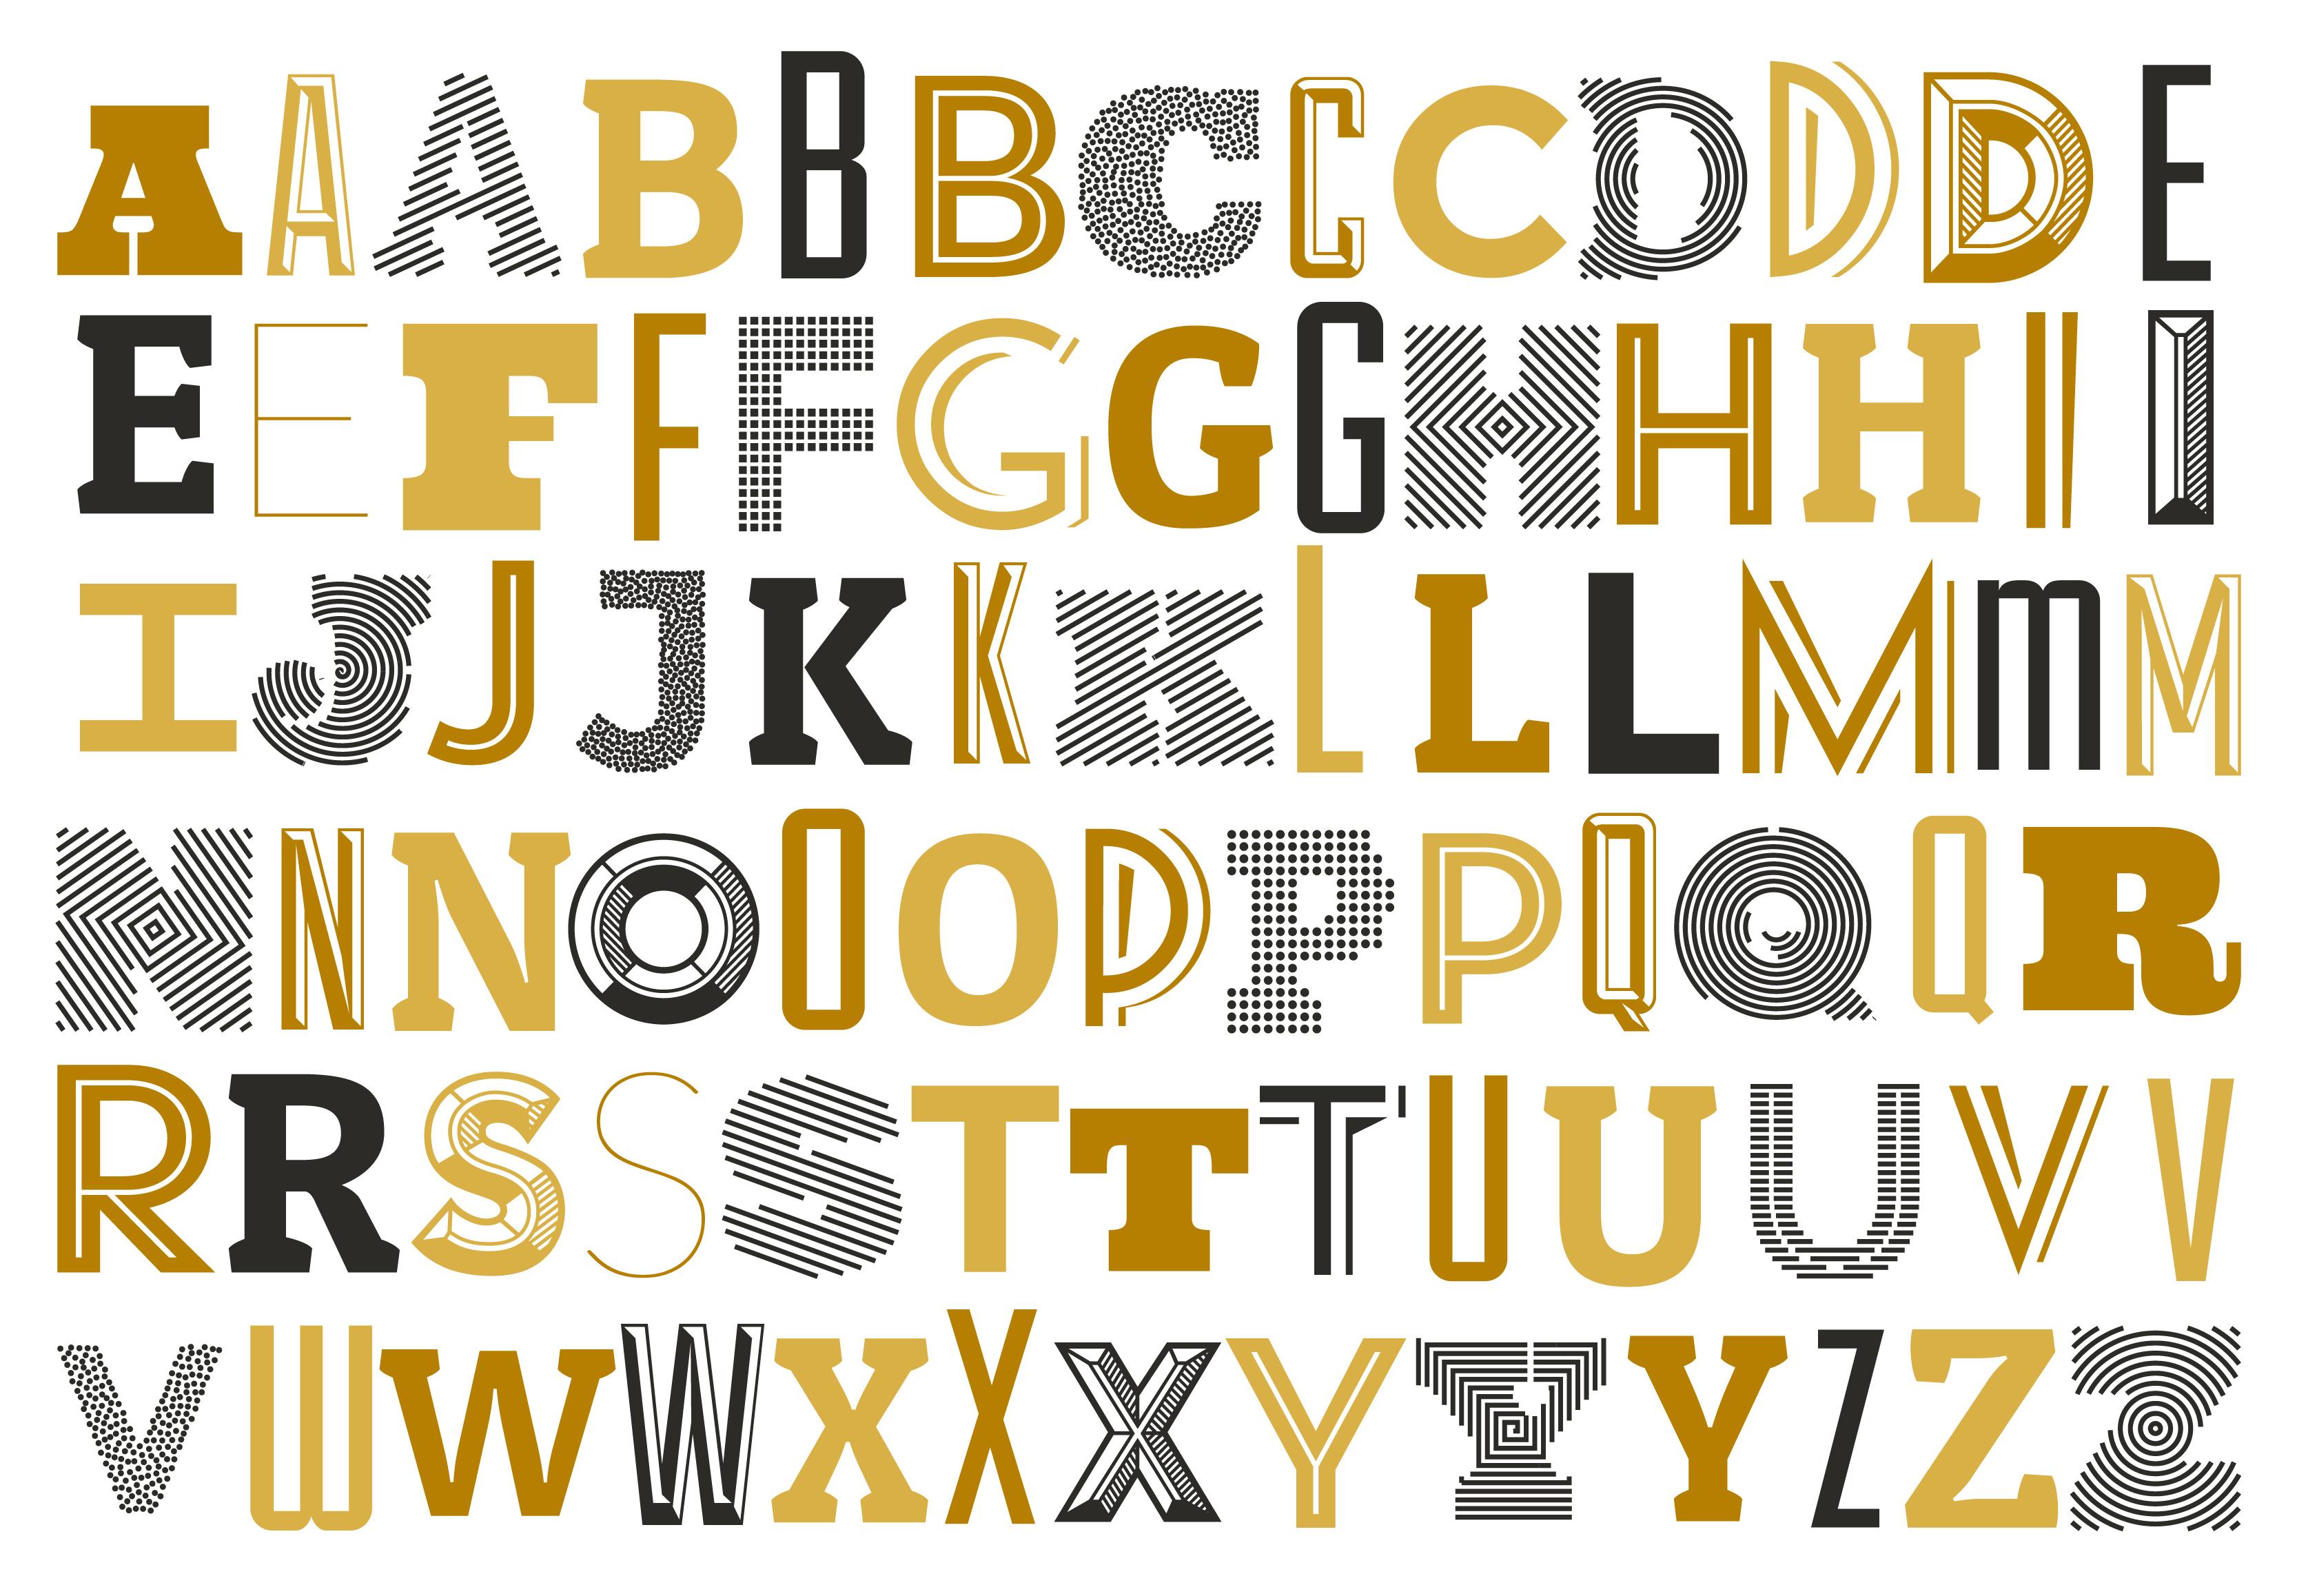 A set of letters with different font styles